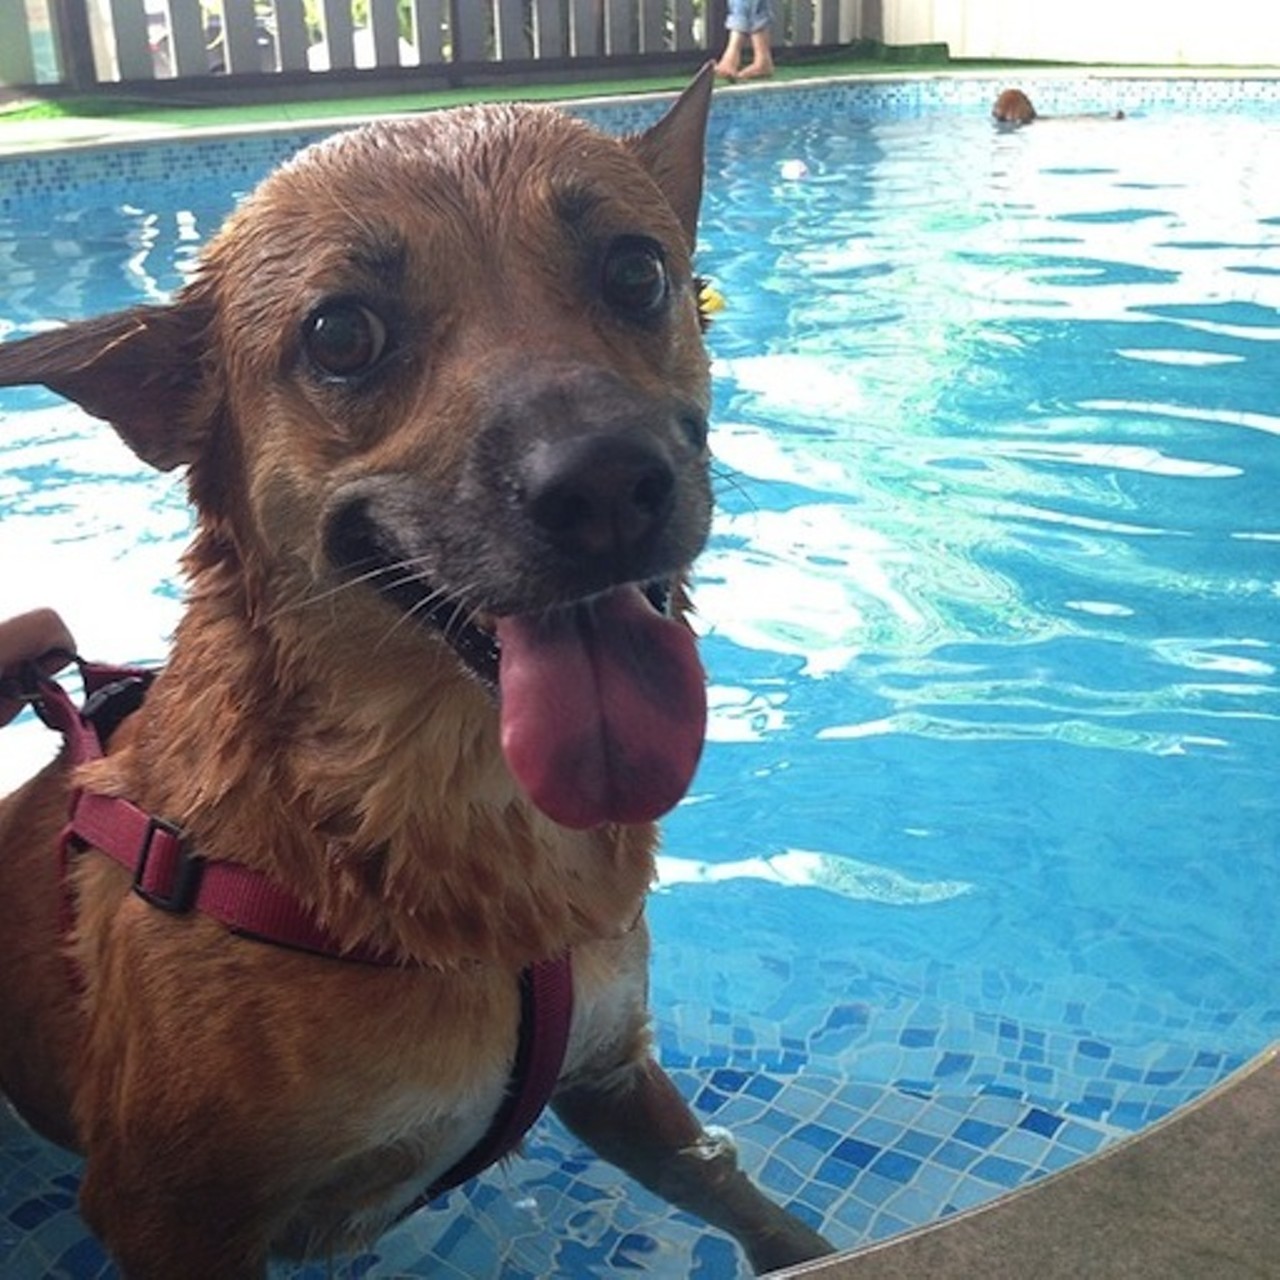 Most pools have doggie swim days the last few days of summer, when no one cares if the water gets swamped with fur. Watch your pup paddle around at Hinckley's Ledge Pool on August 24 from 1:00 - 5:00.